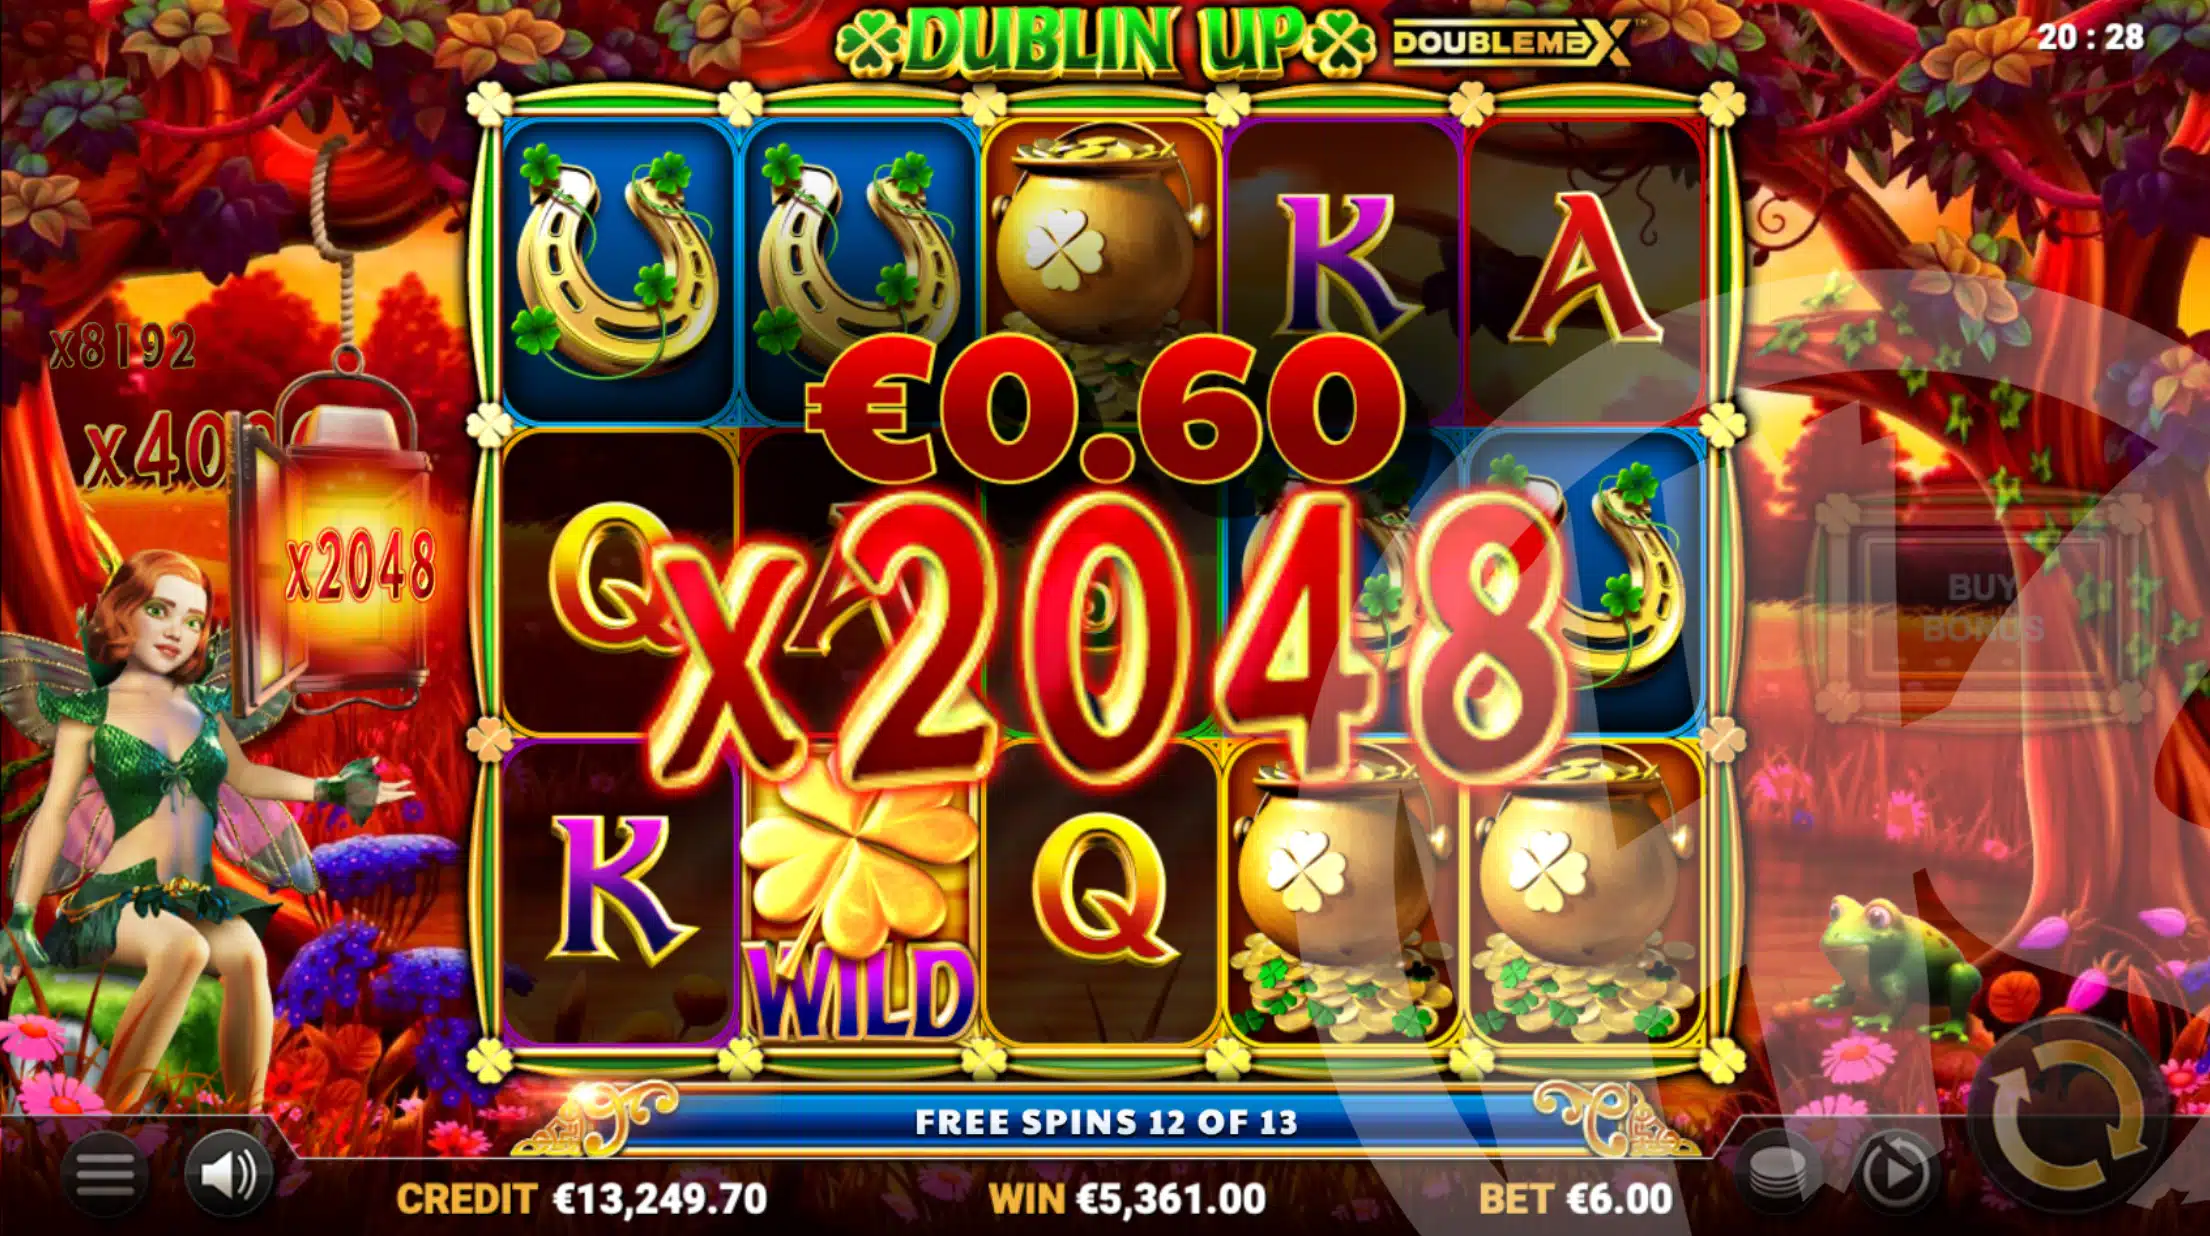 Dublin Up DoubleMax Free Spins